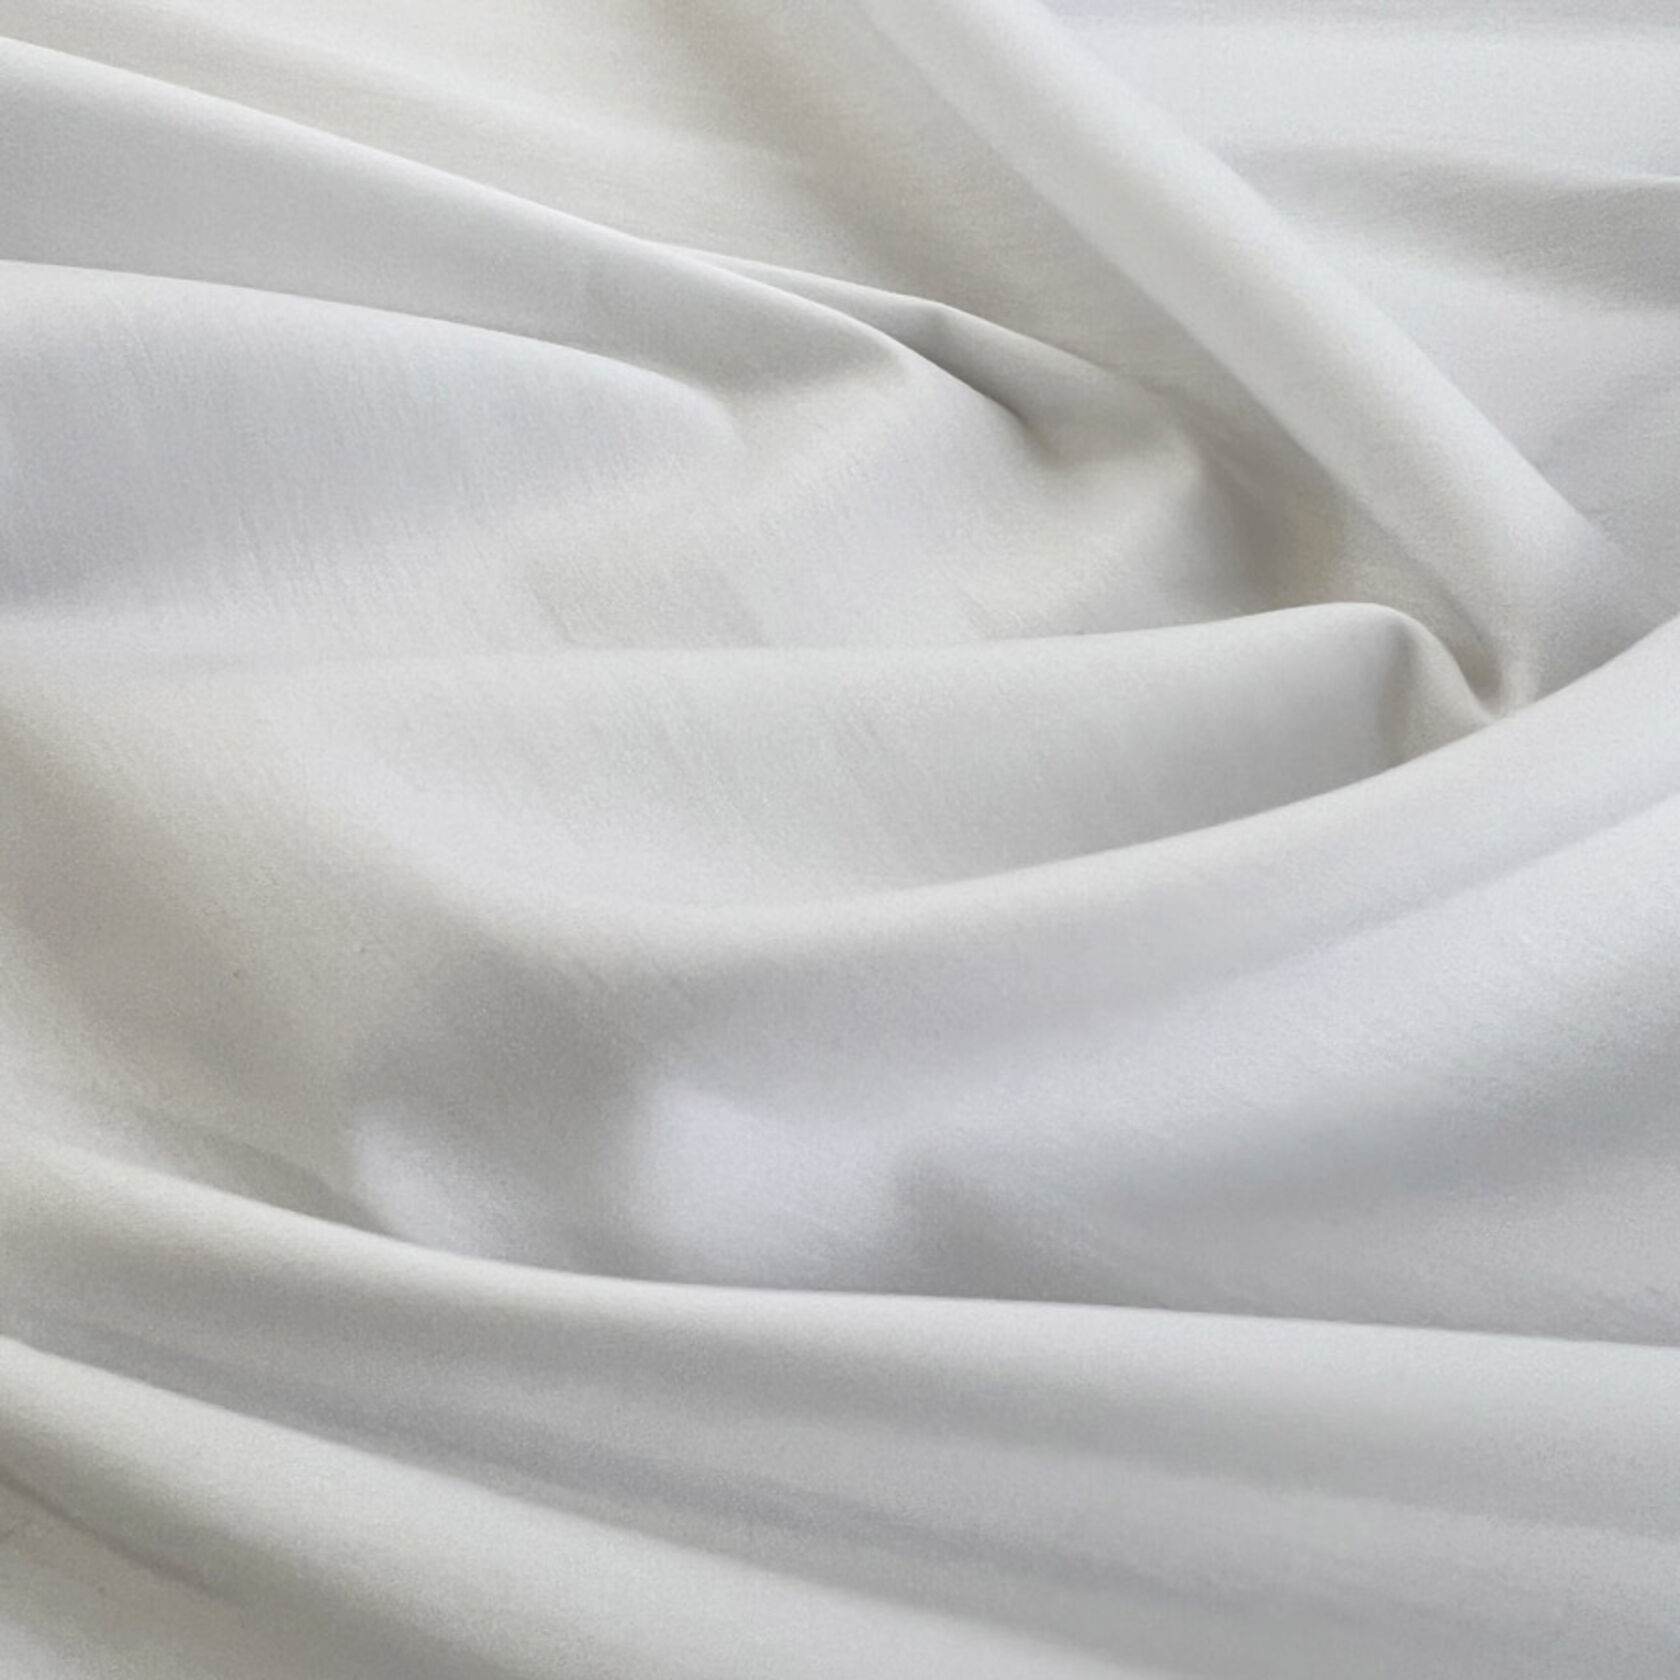 https://www.croftmill.co.uk/images/pictures/00-2023/08-august-2023/stretch_lawn_white_cotton_elastane_polyamide_fine_woven_shirting_fabric_cu-(840x840).jpg?v=819c9ea9